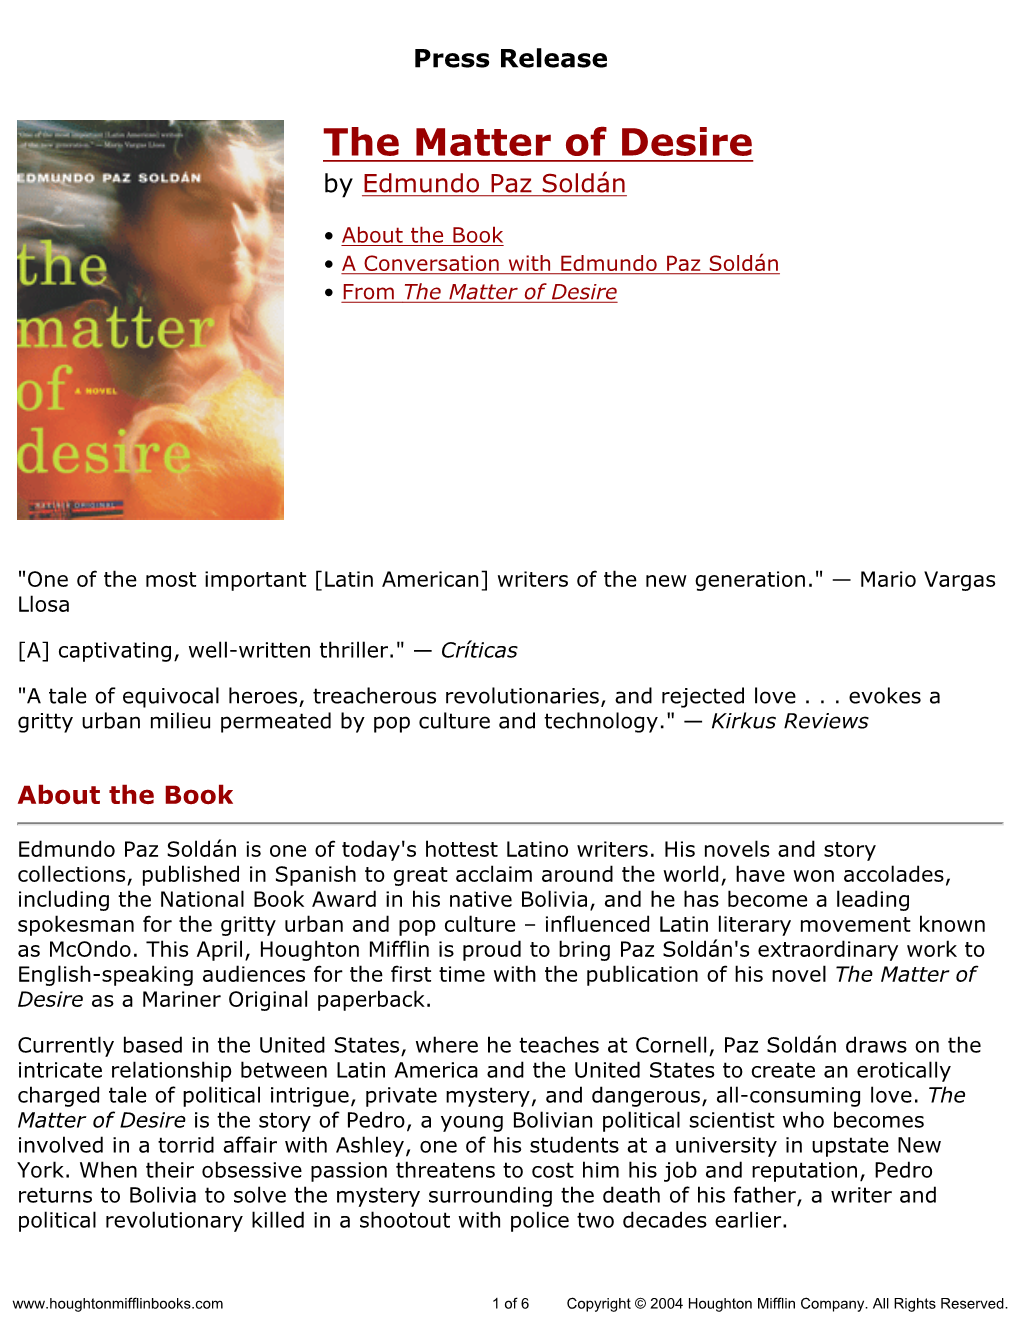 Press Release for the Matter of Desire Published by Houghton